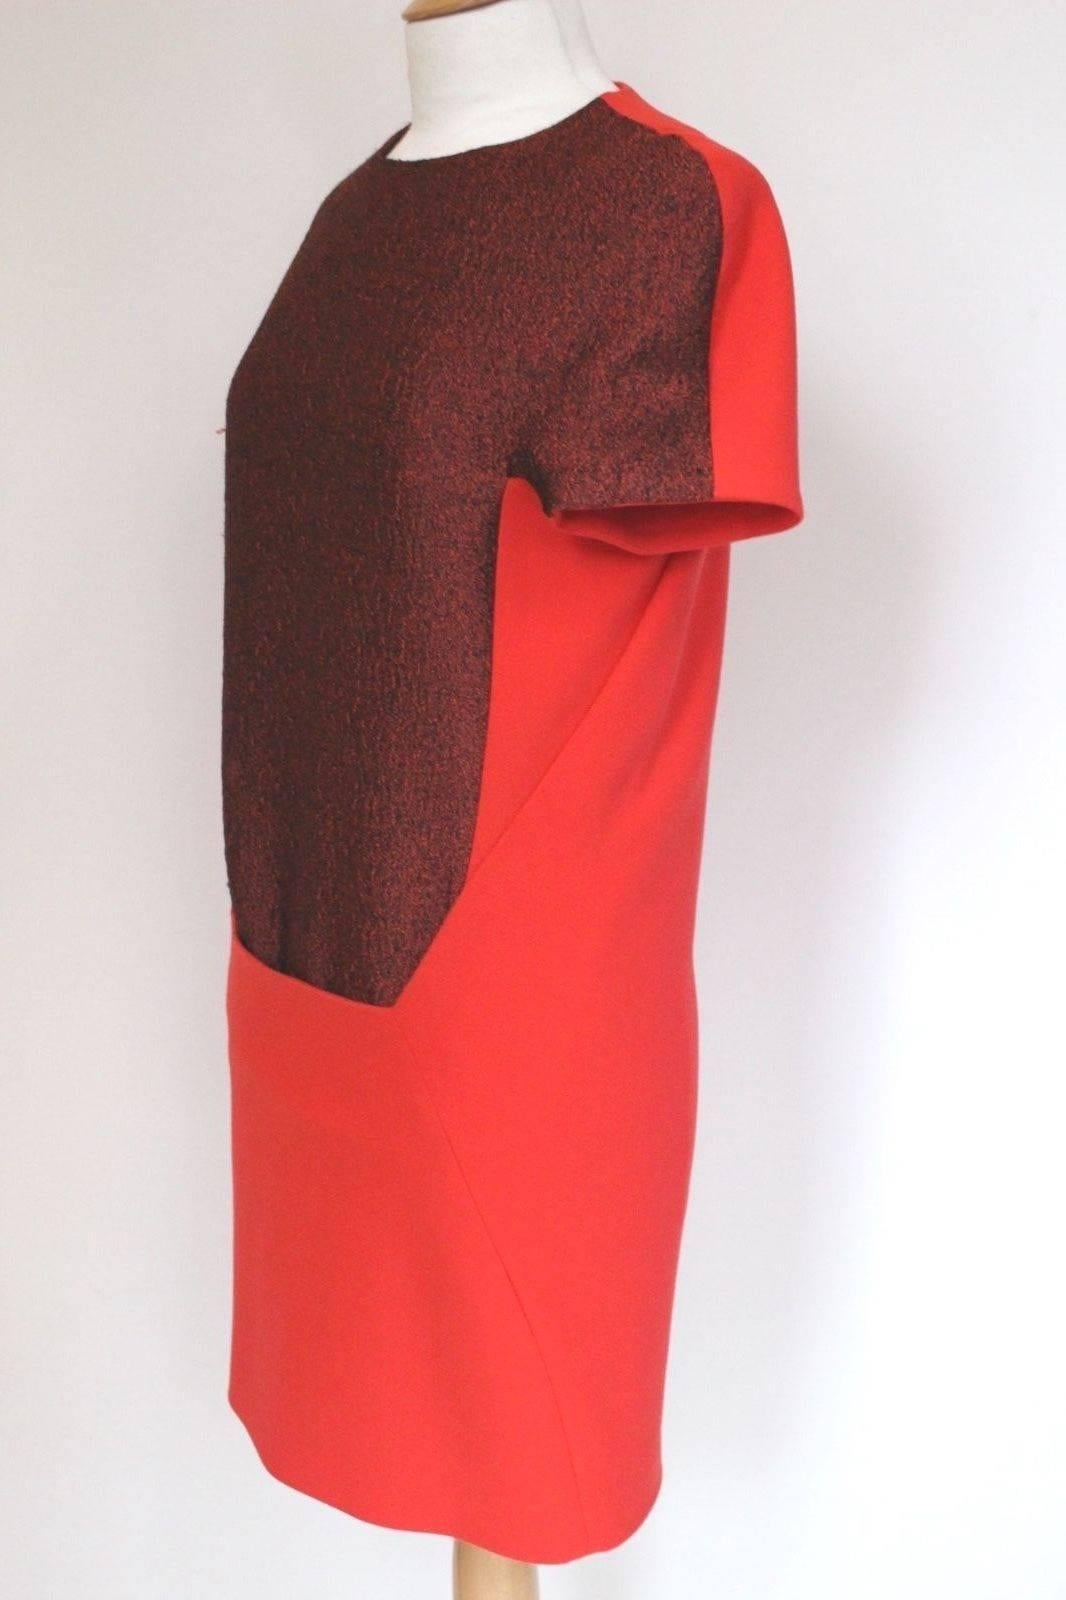 Hussein Chalayan A/W 2012 Ready-To-Wear Catwalk Red Dress I 38 uk 6   In Excellent Condition For Sale In London, GB